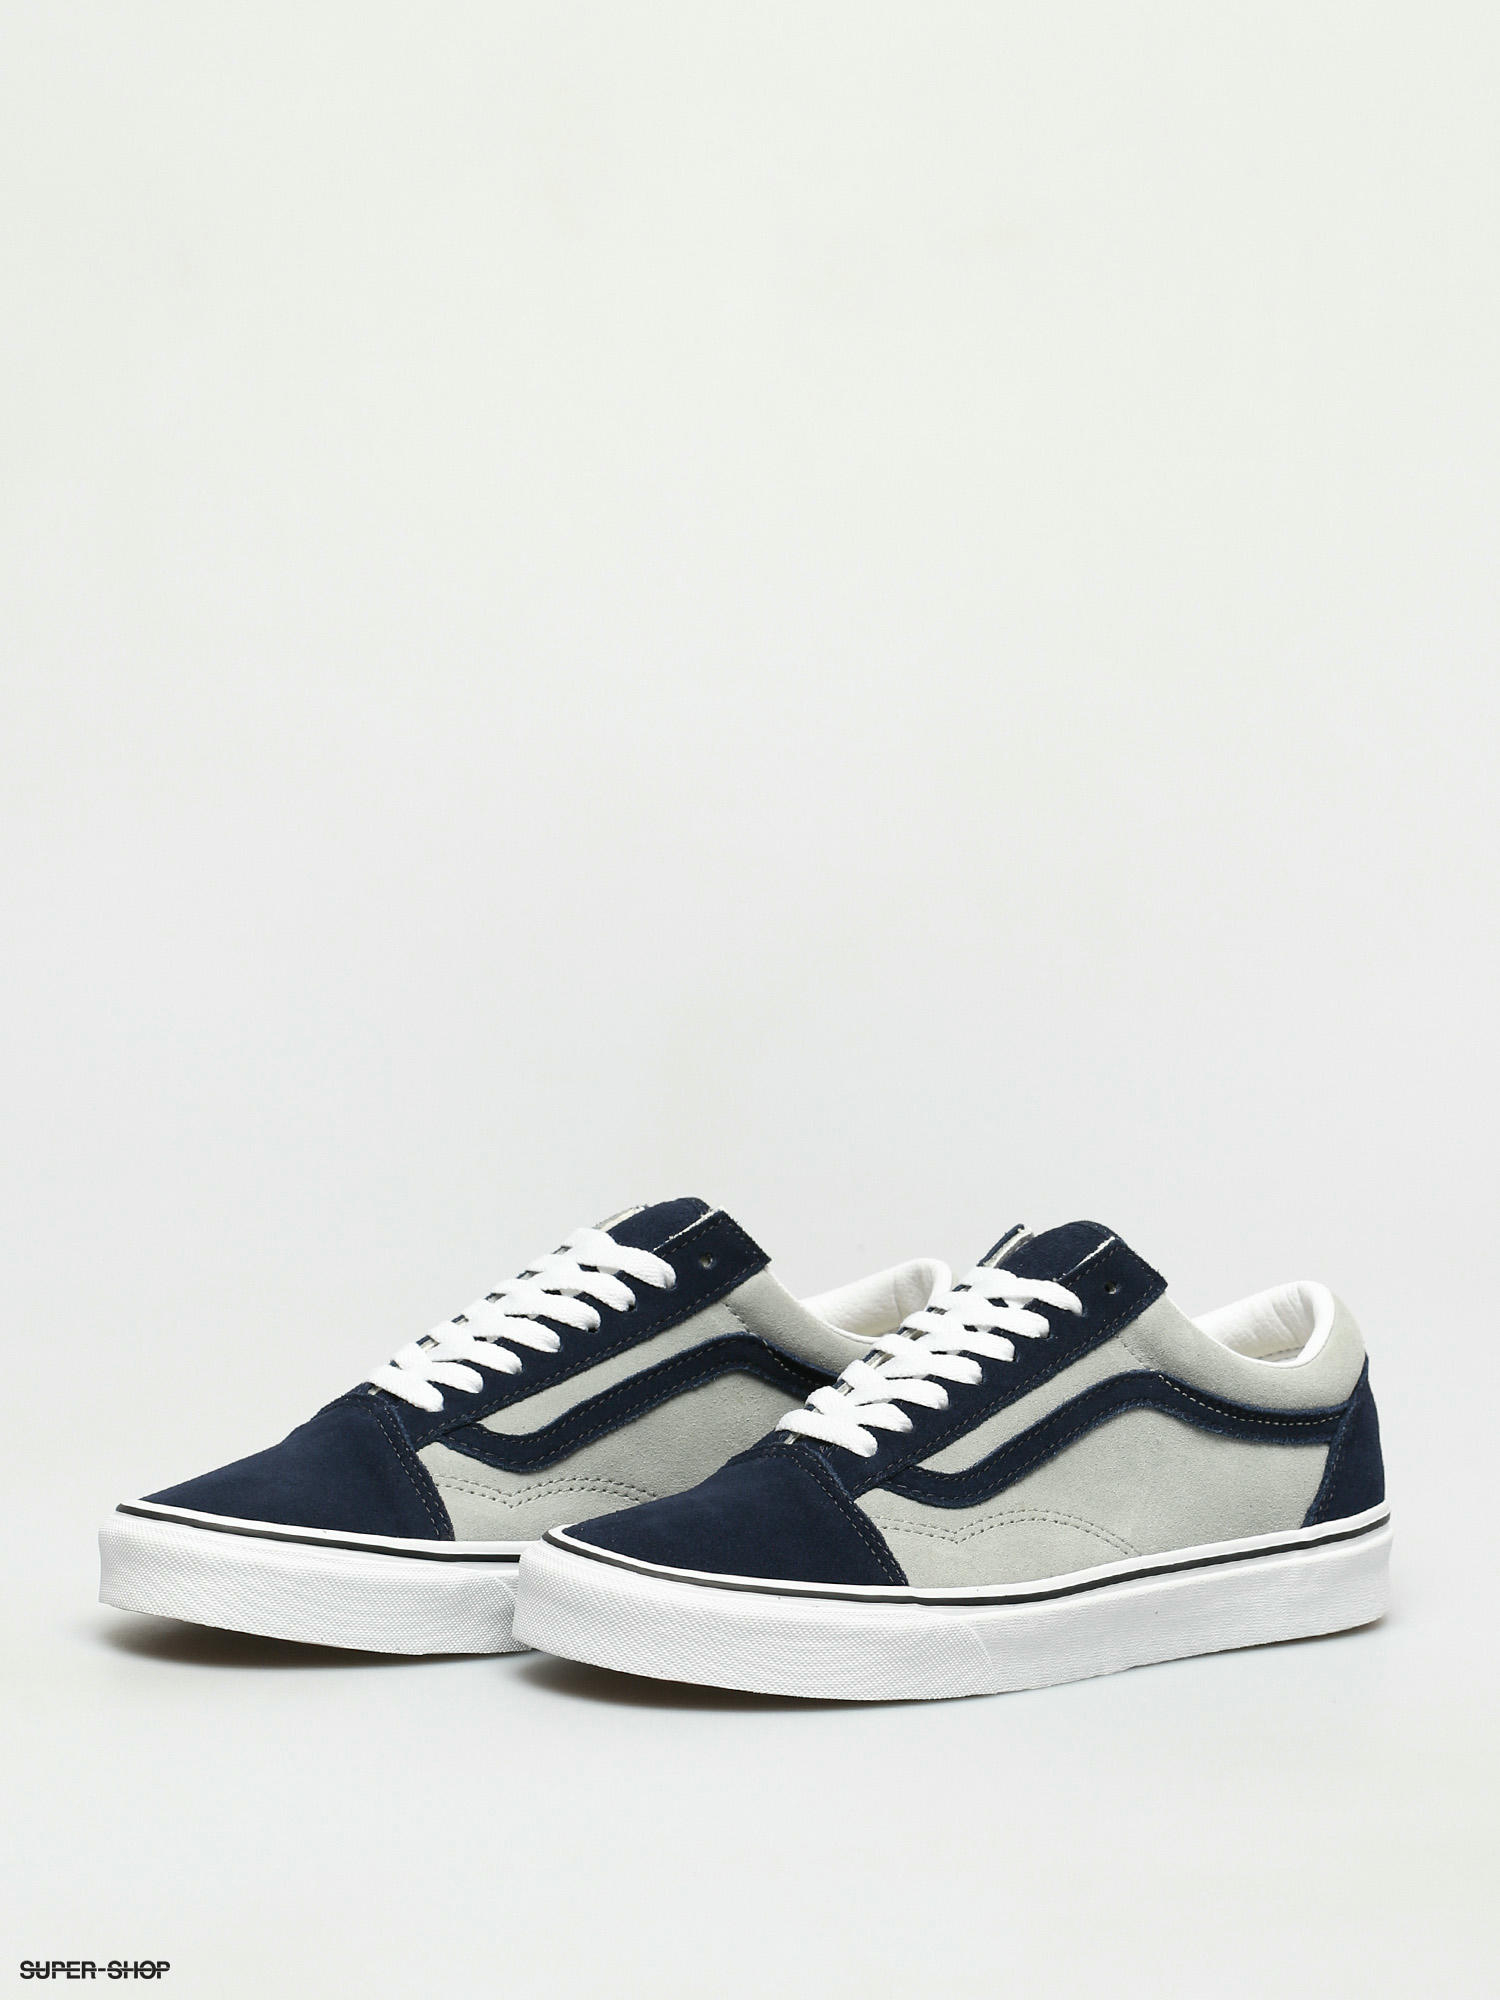 blue and gray vans